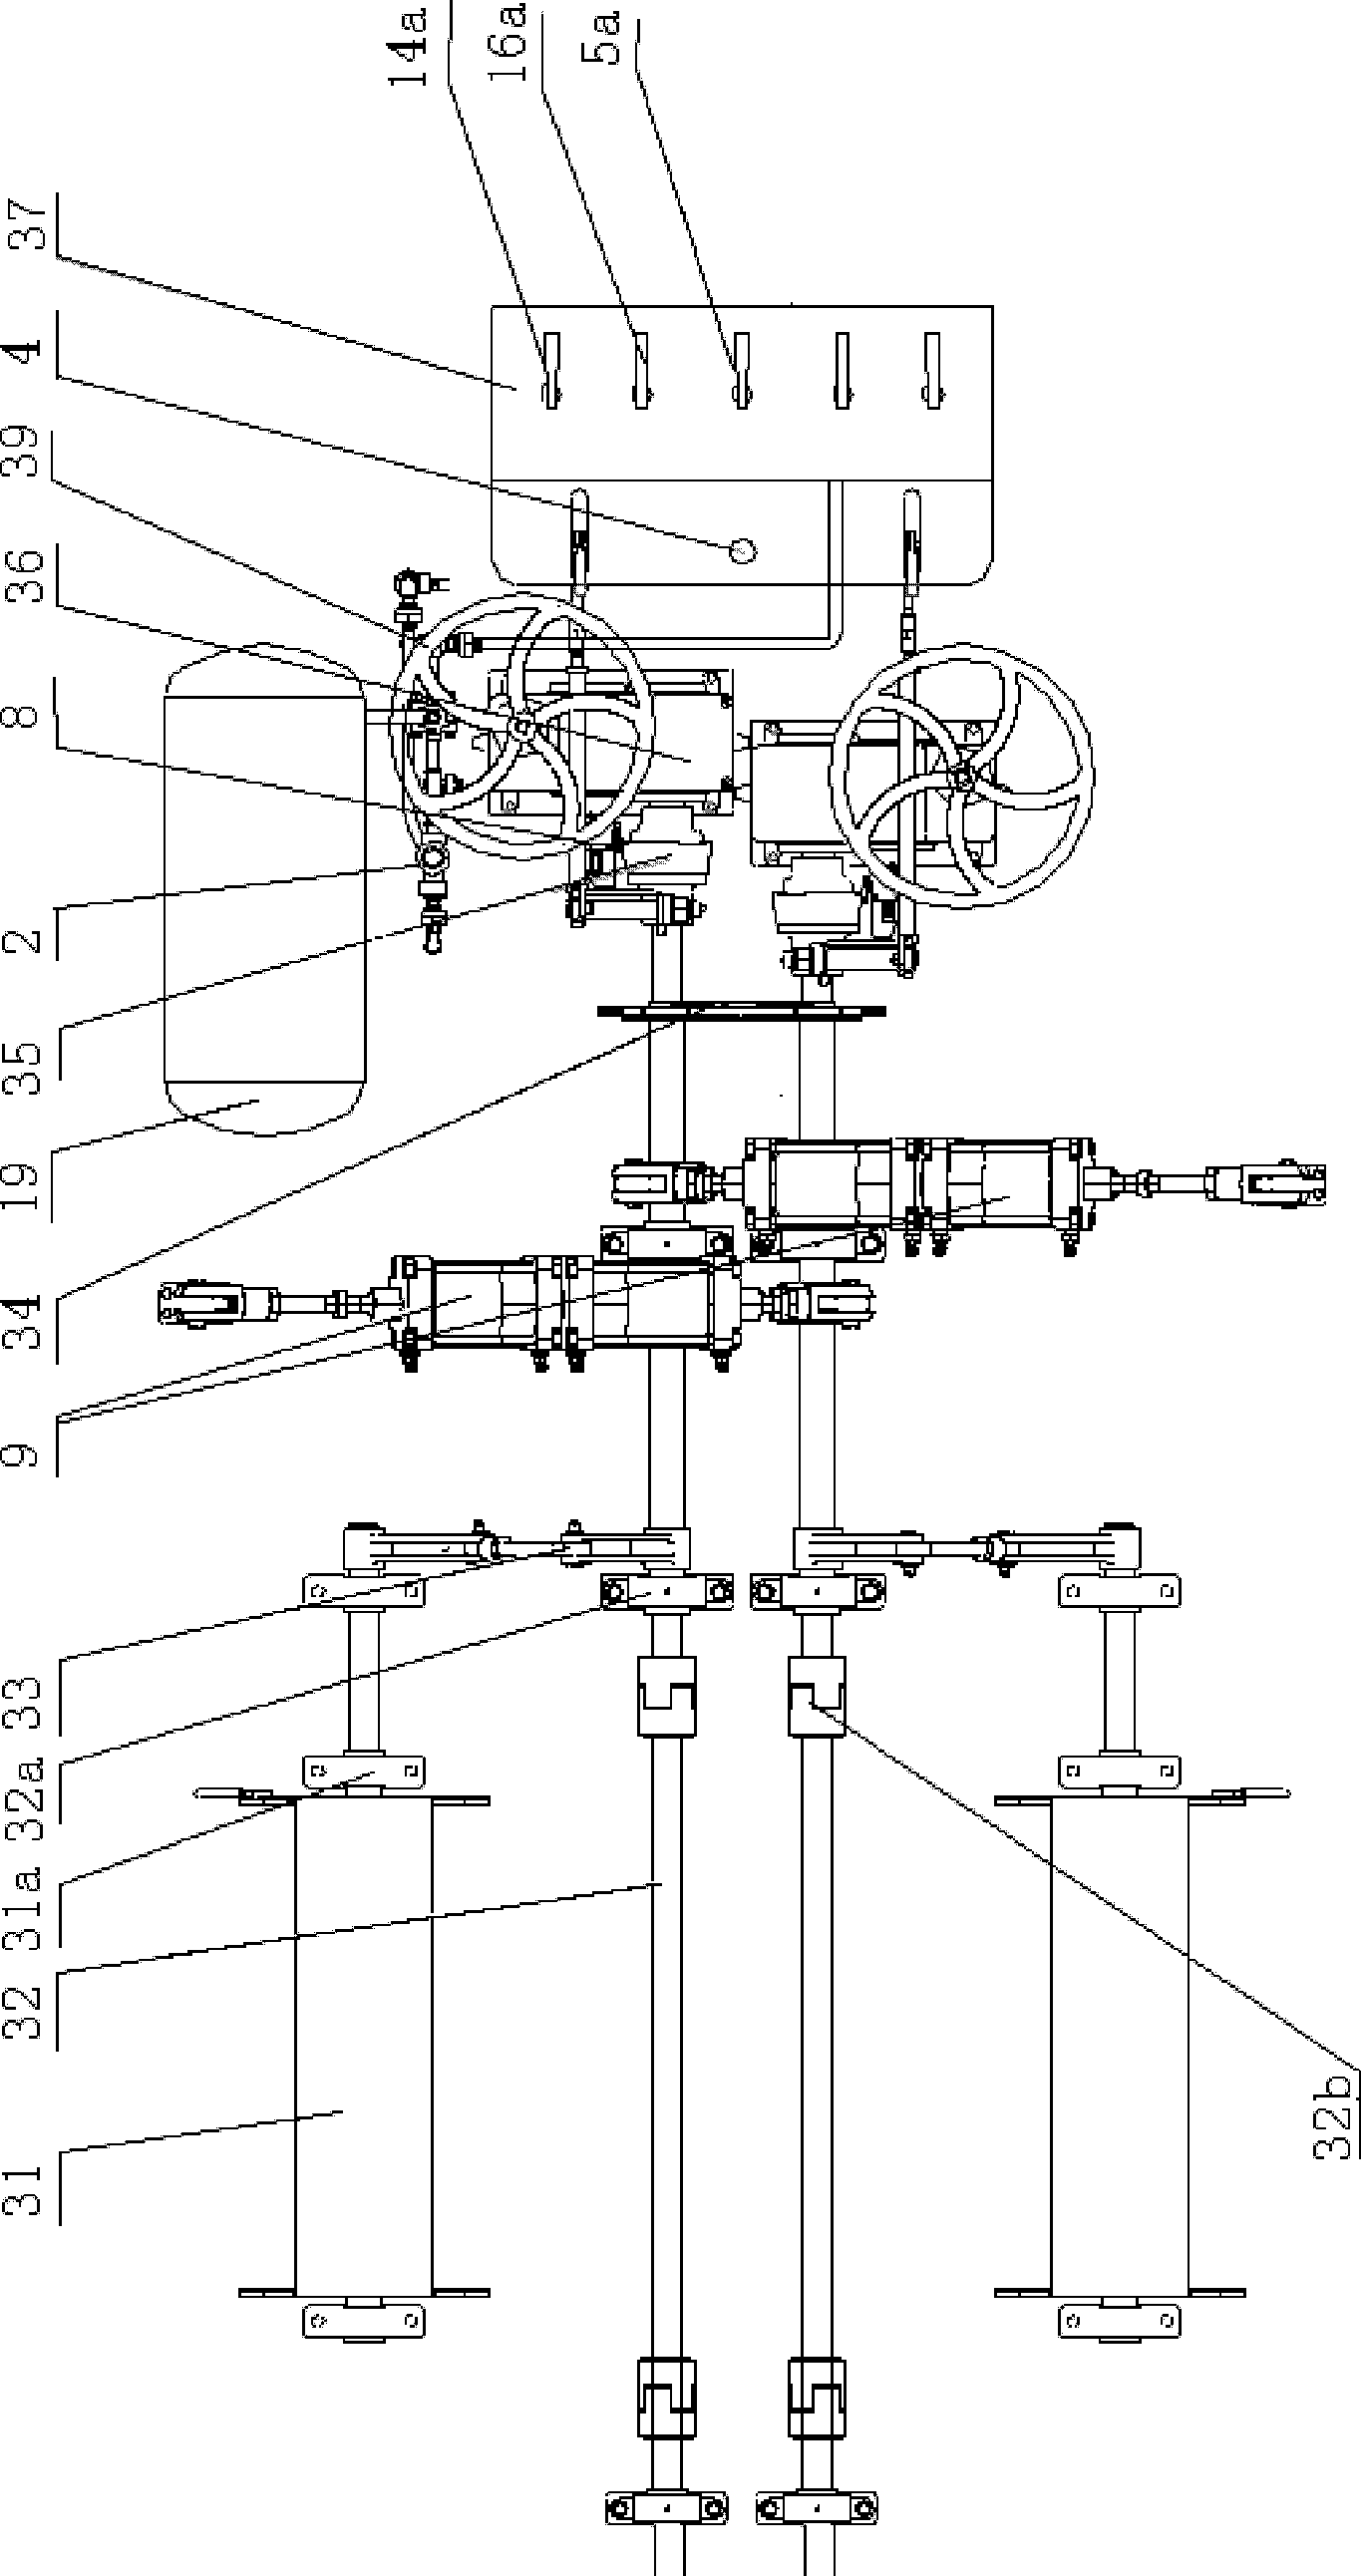 Bottom door opening and closing air control system for railroad hopper car